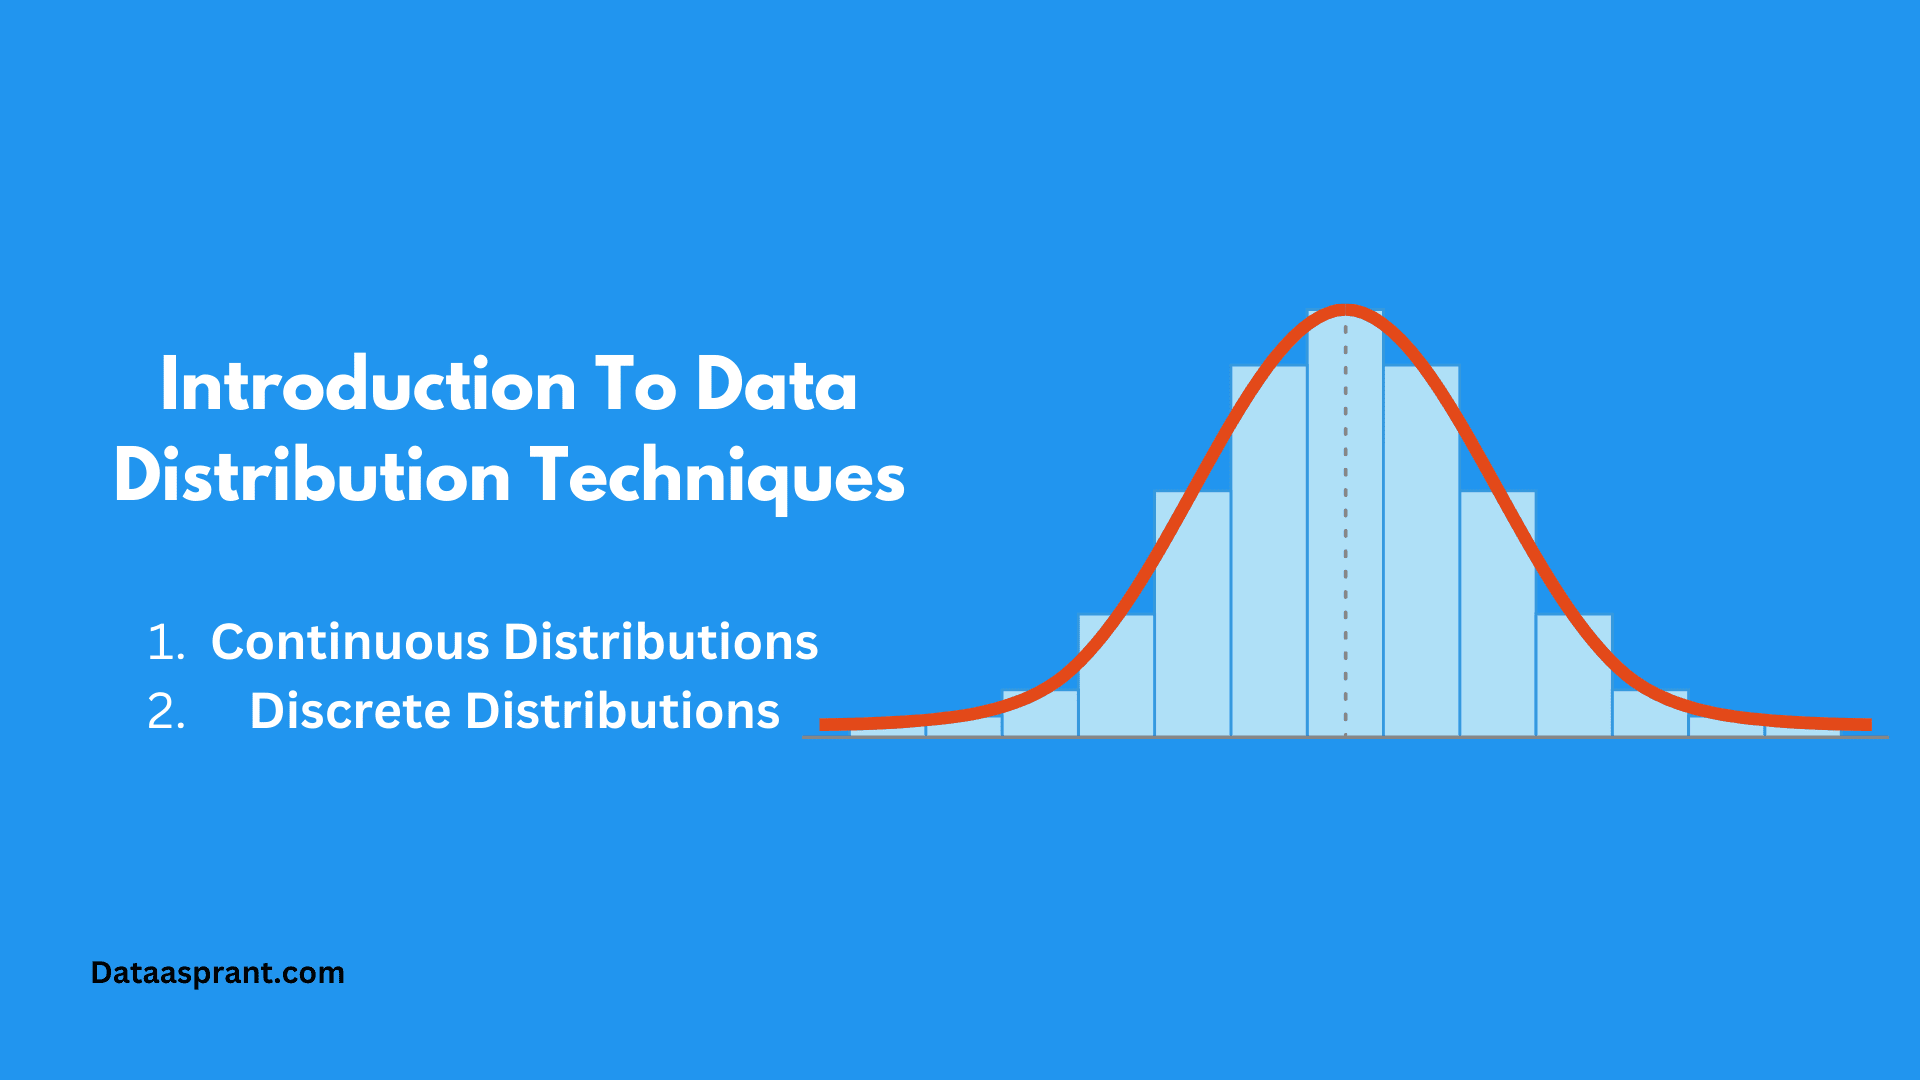 Introduction To Data Distribution Techniques